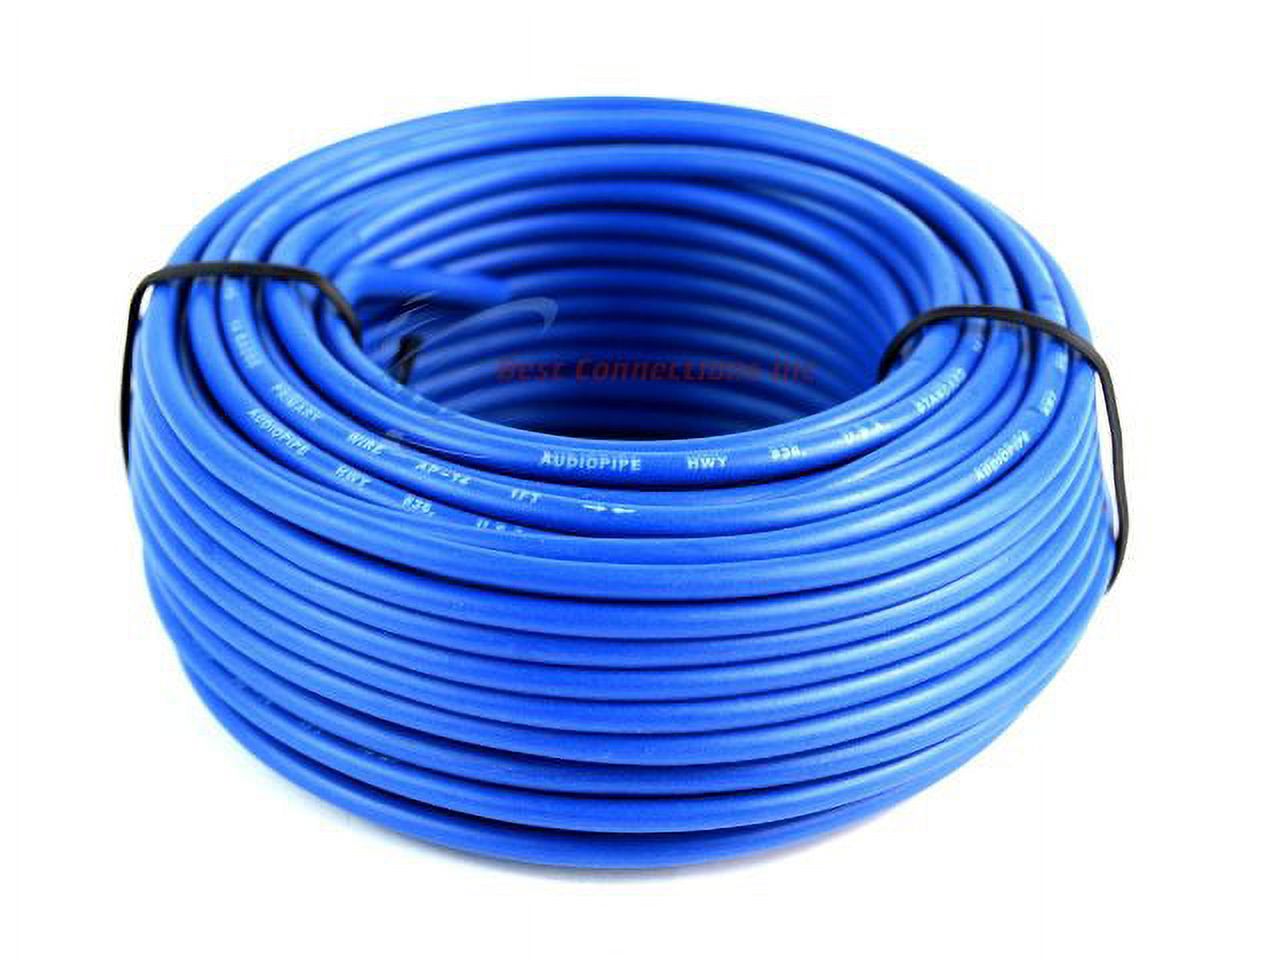 14 GA 50' Feet Blue Audiopipe Car Audio Home Remote Primary Cable Wire - image 1 of 2